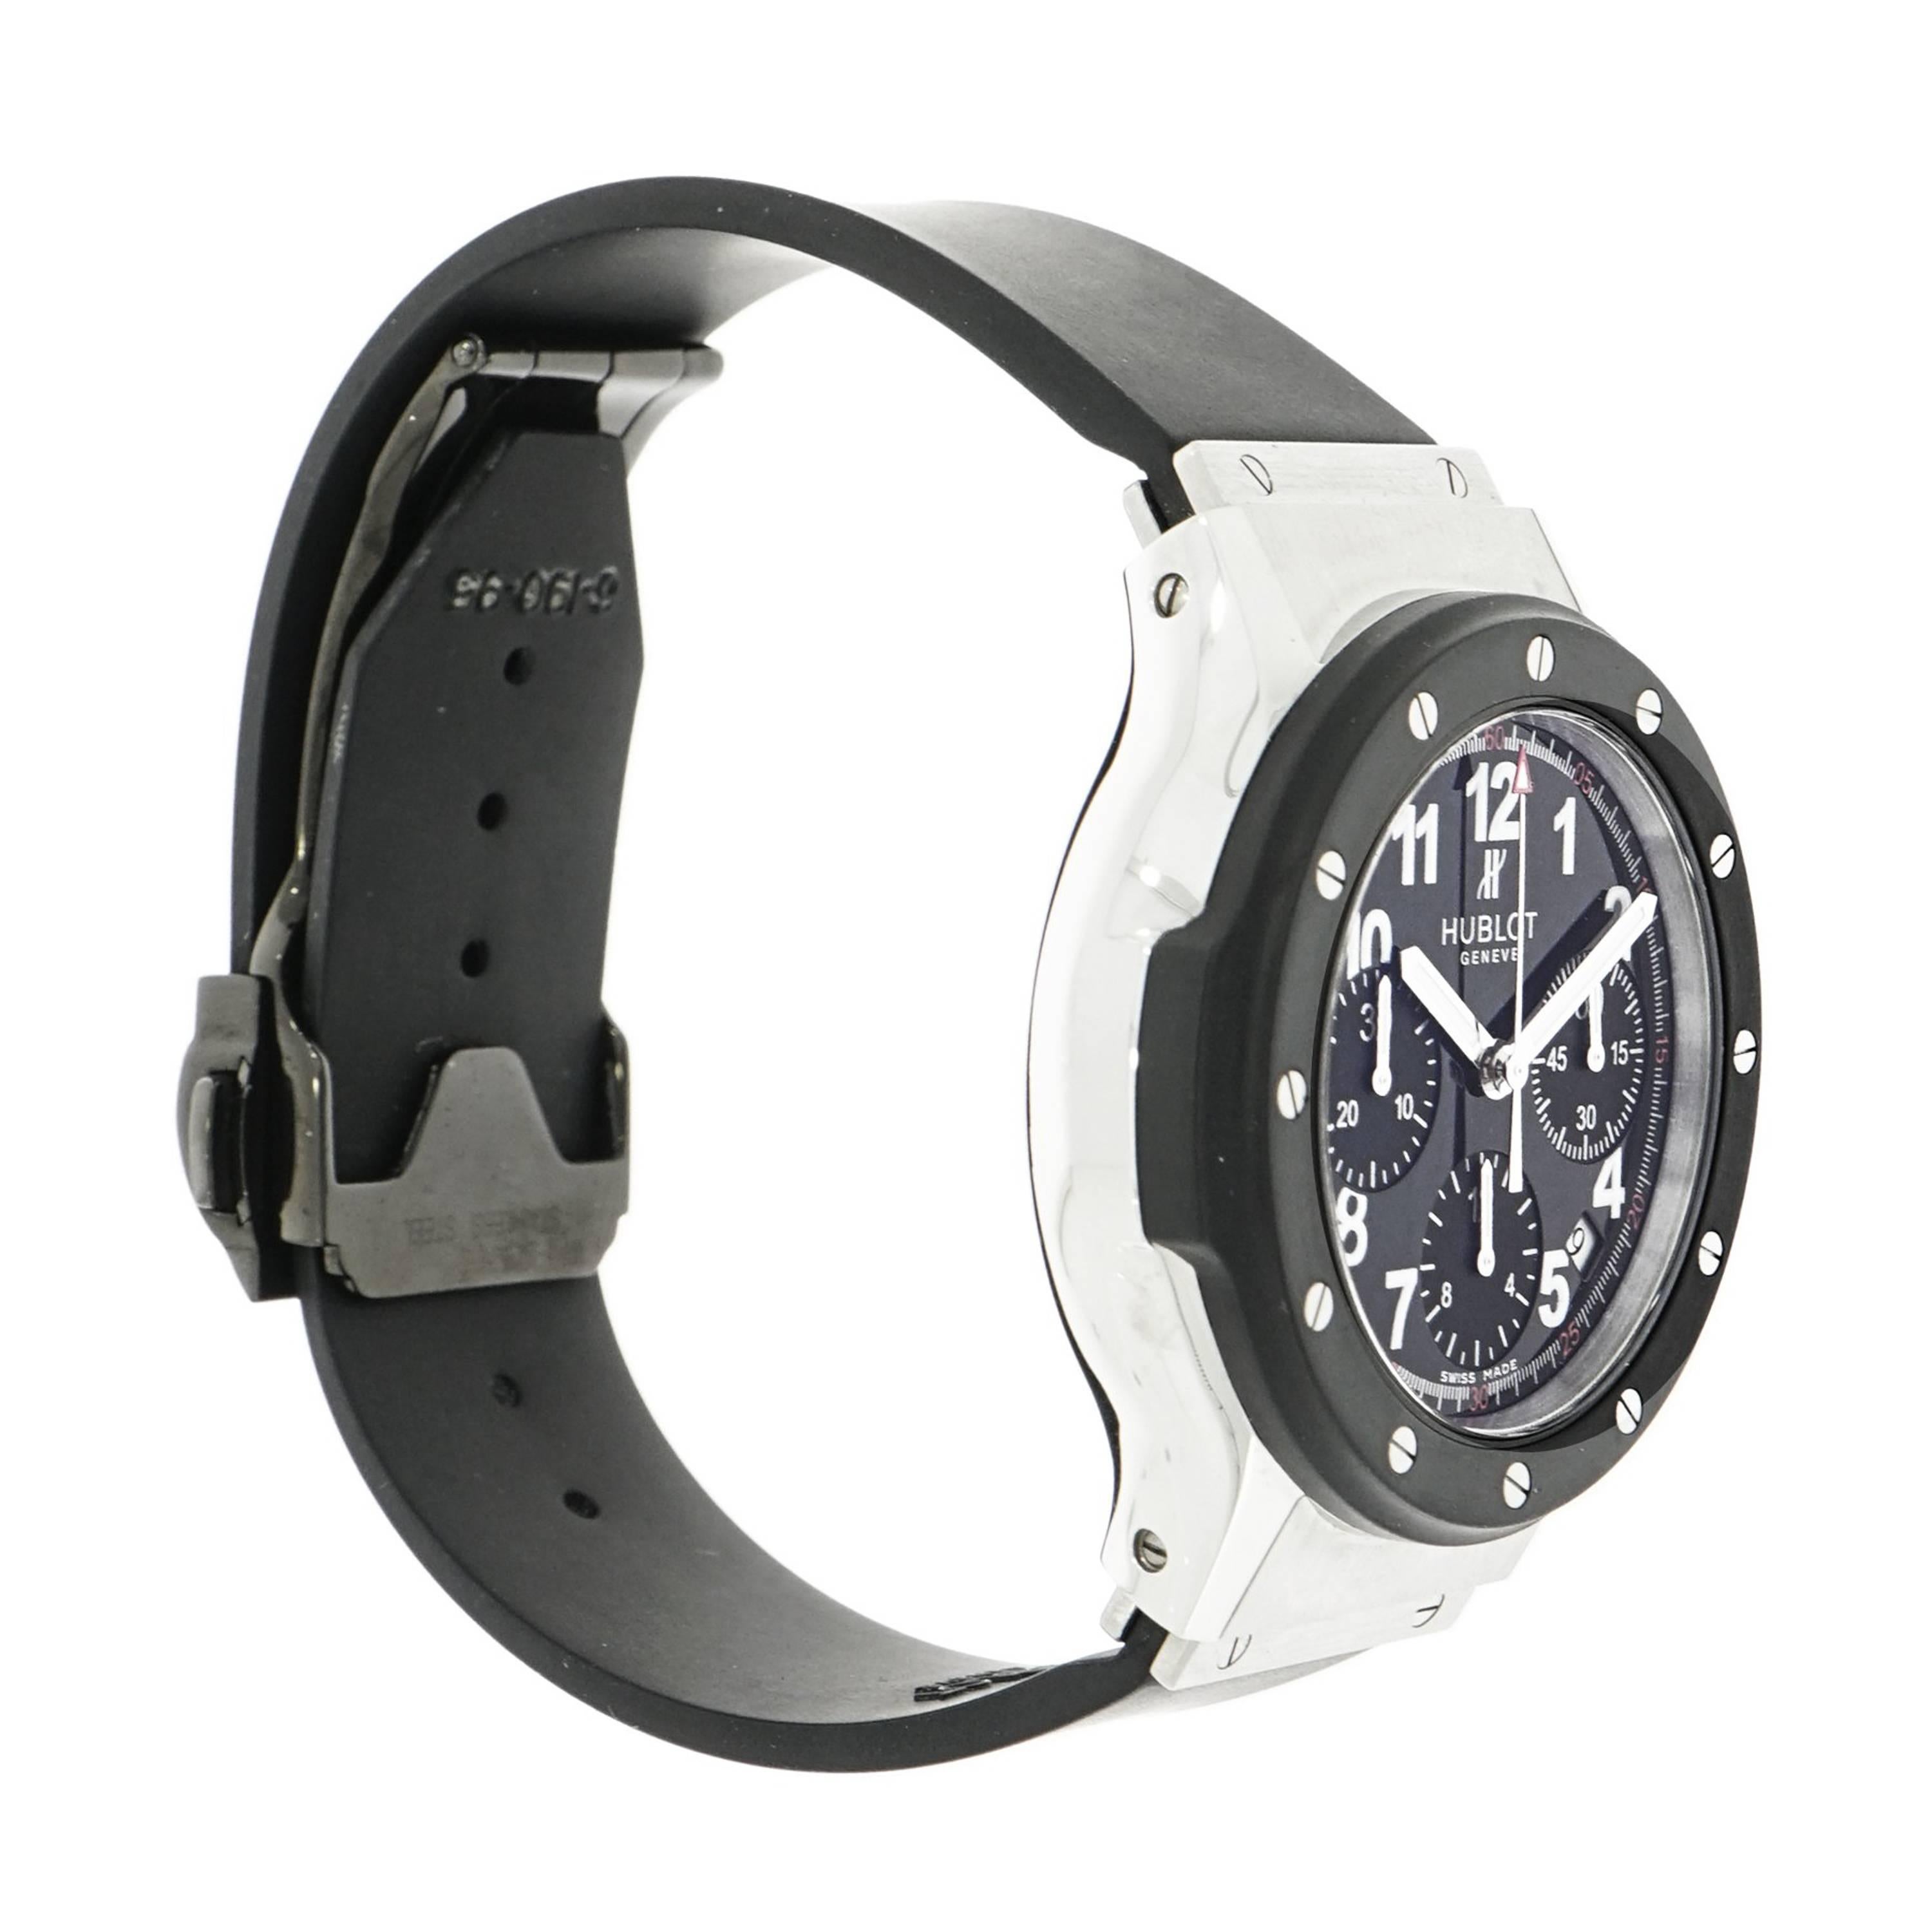 Hublot, a cutting edge and innovative design with quality craftsmanship to create satisfaction with every timepiece. This Hublot Super B Black Magic Wristwatch features a self-winding movement with indications for the Hours, Minutes, Small Seconds,